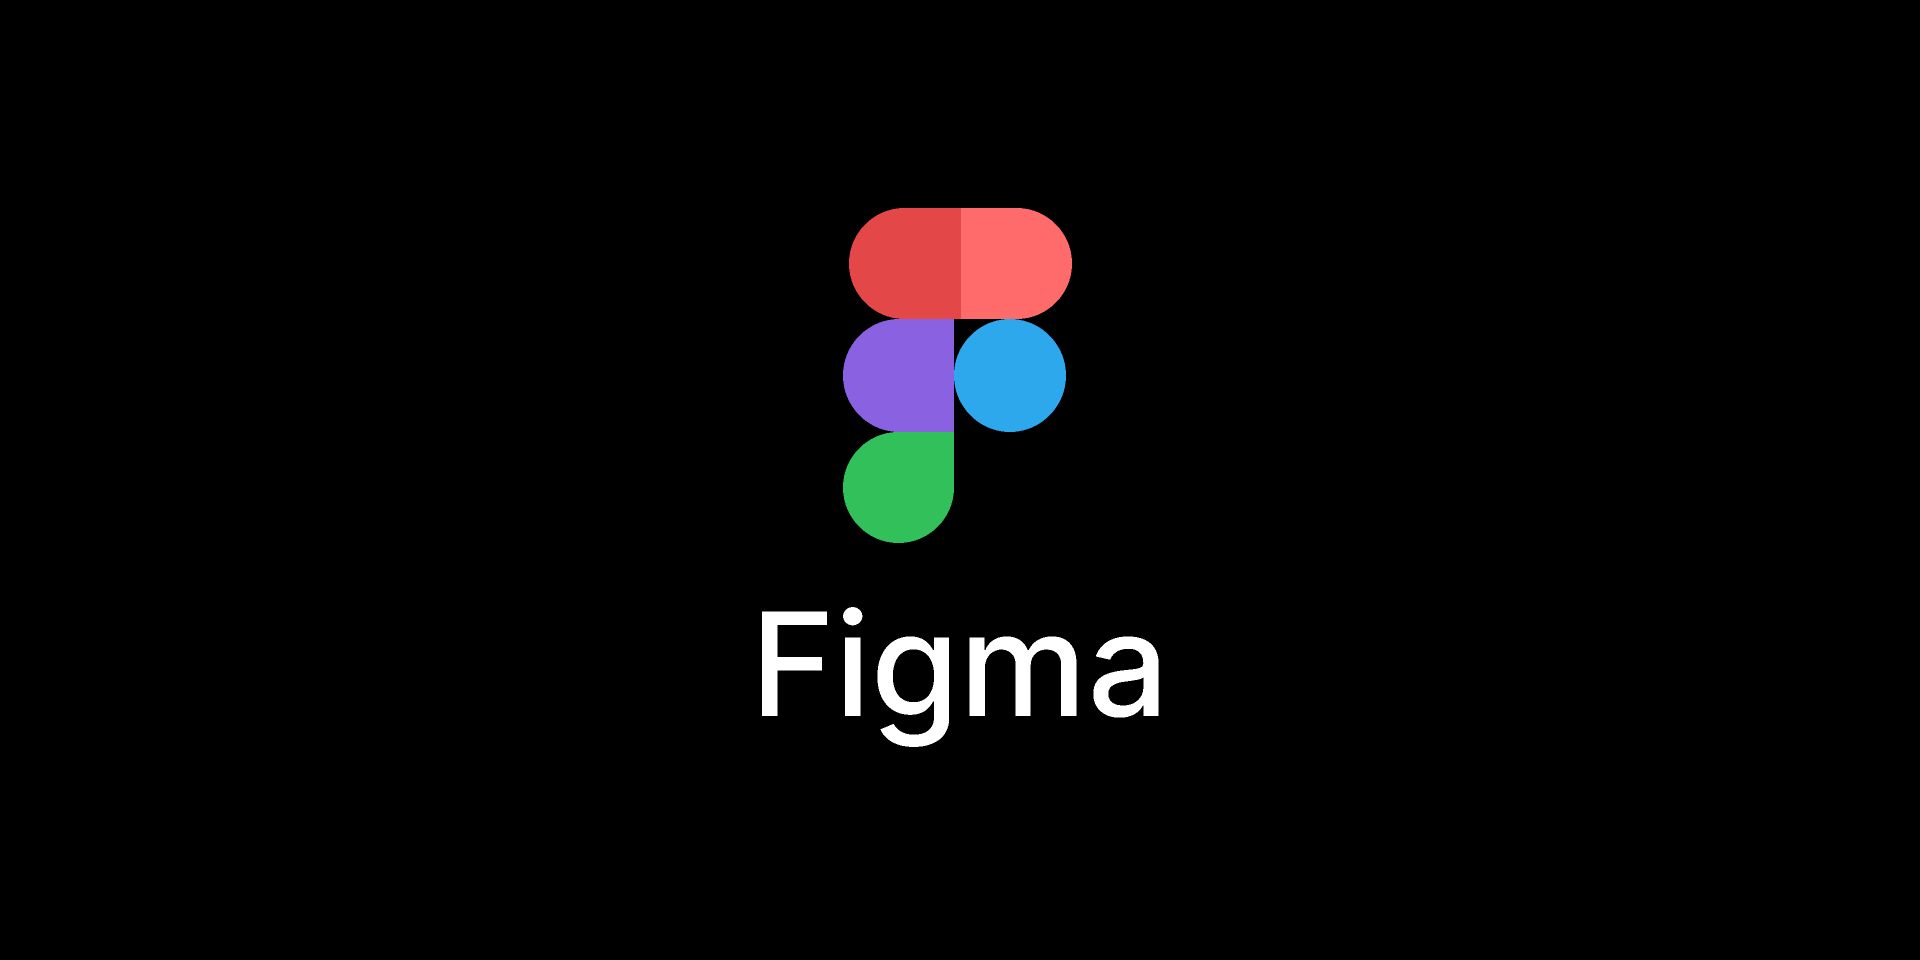 15-astounding-facts-about-figma